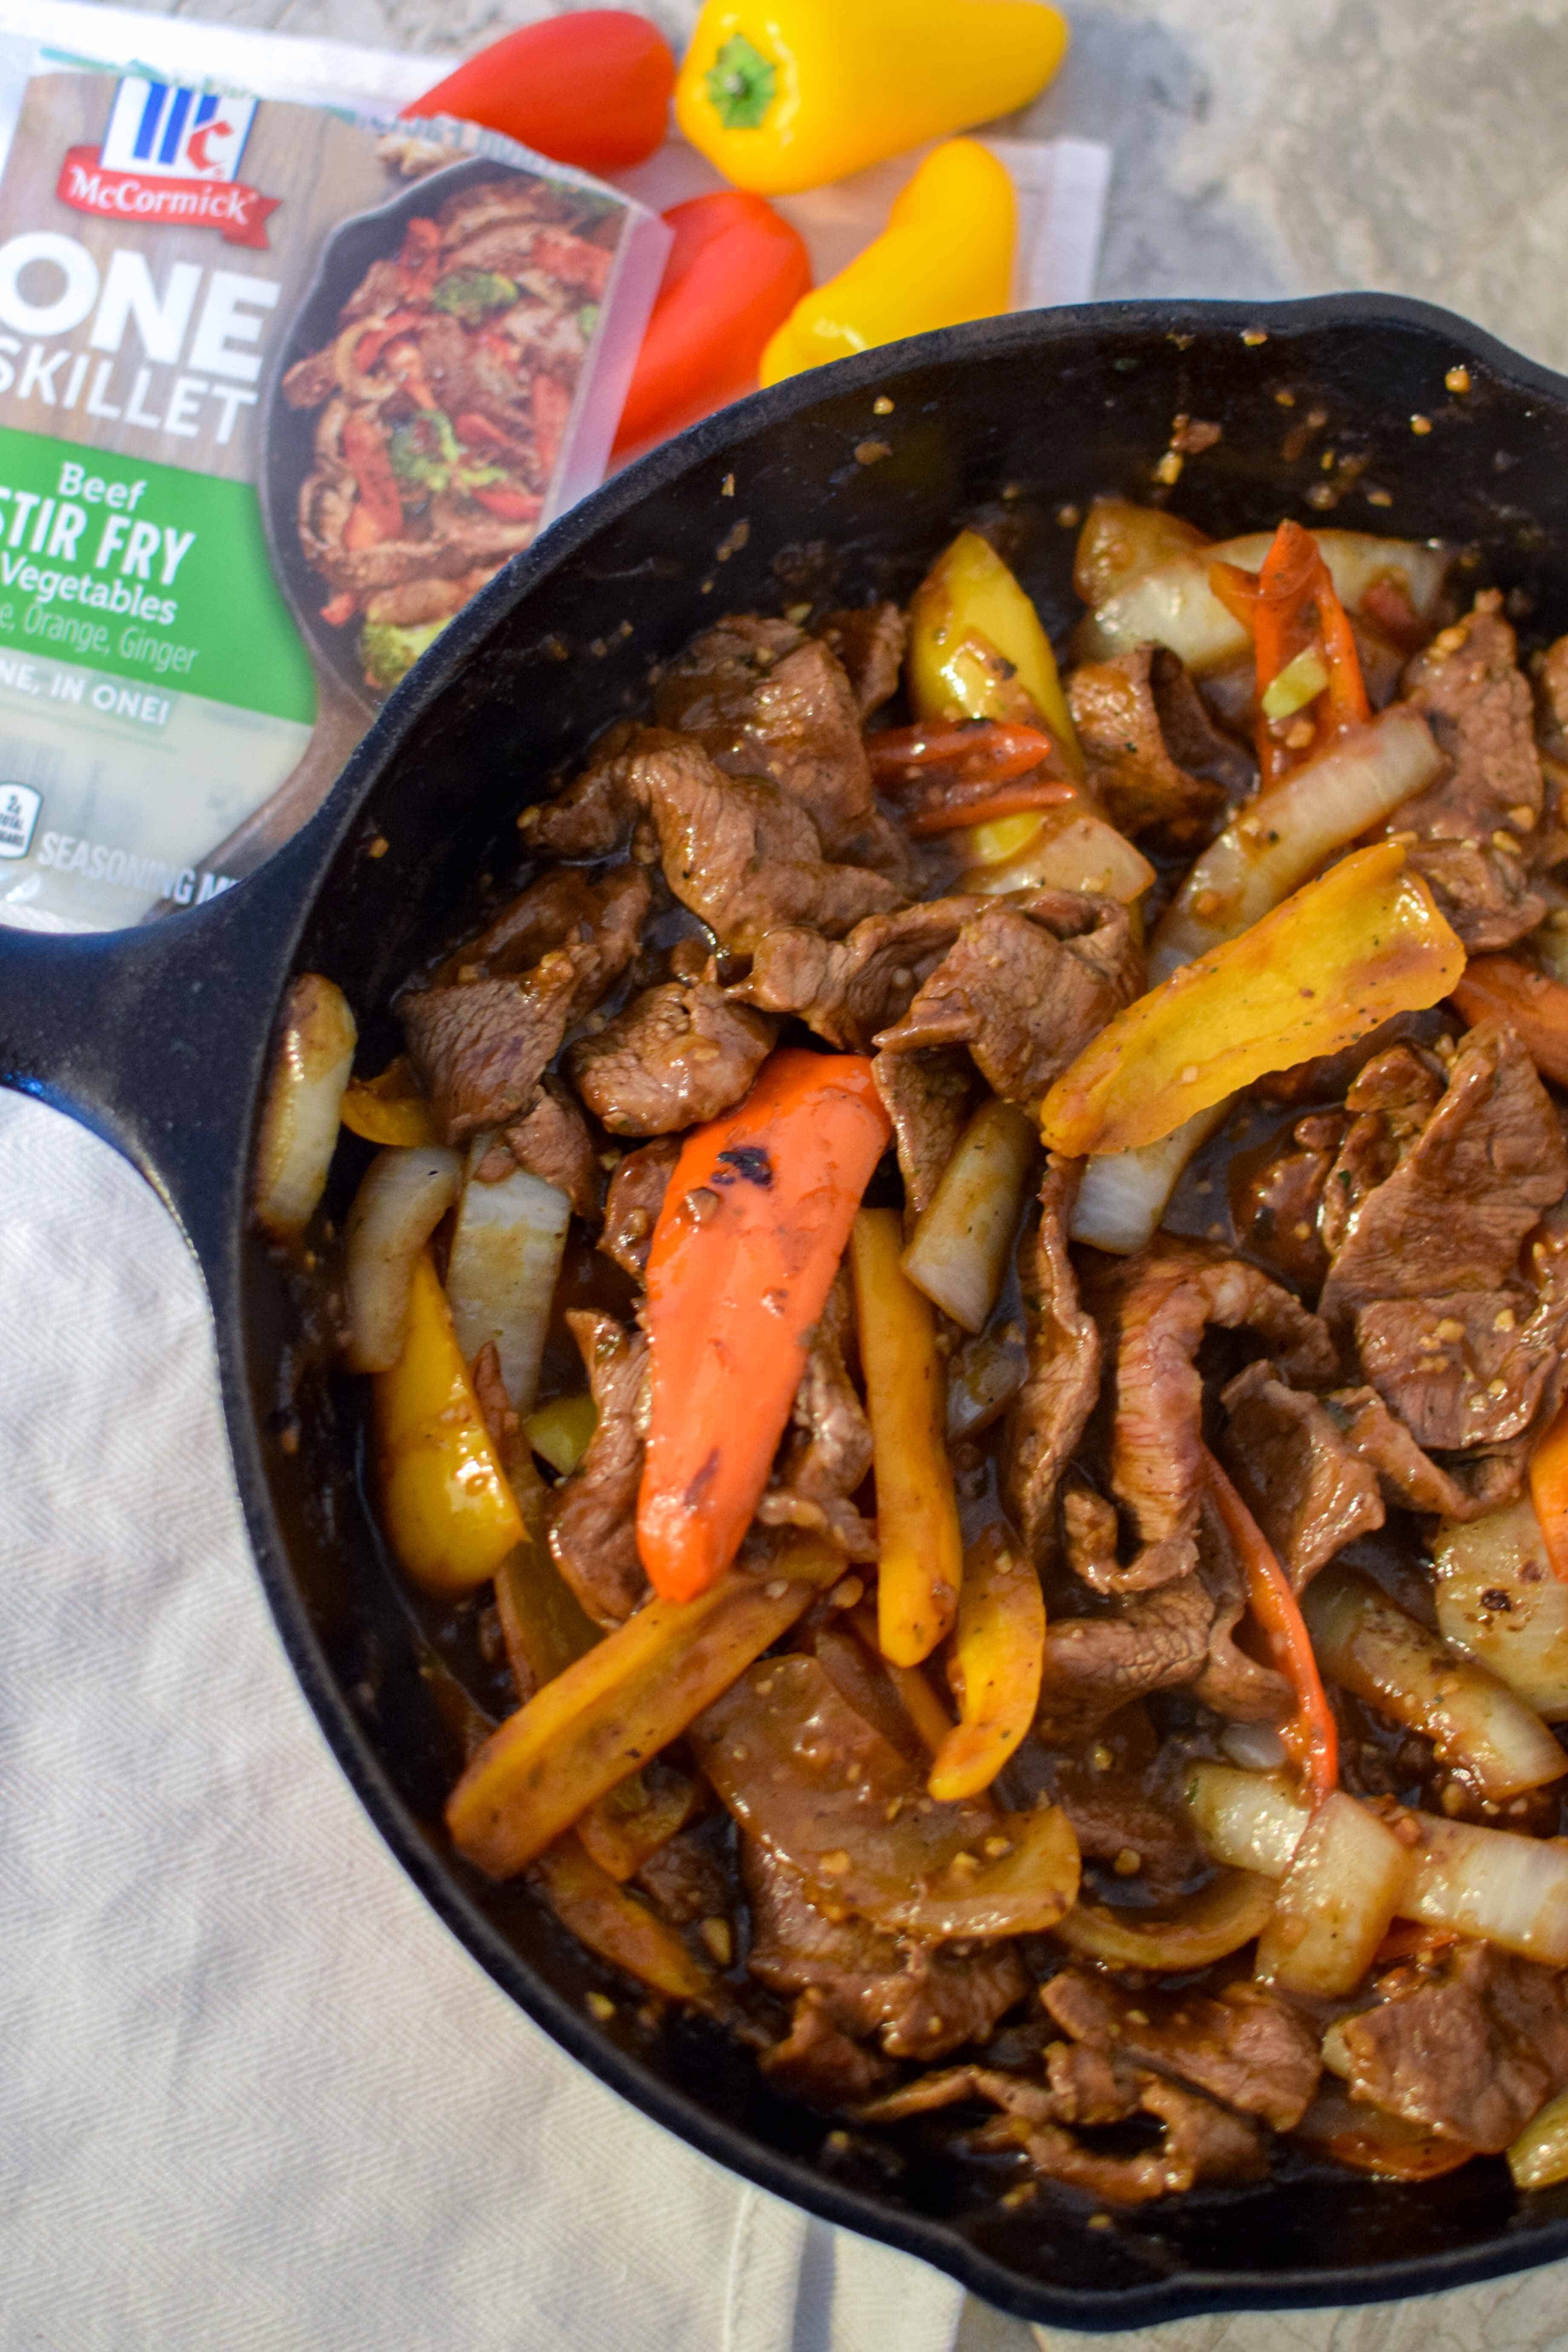 Delicious Beef Stir Fry Recipe For One Pan Dinner